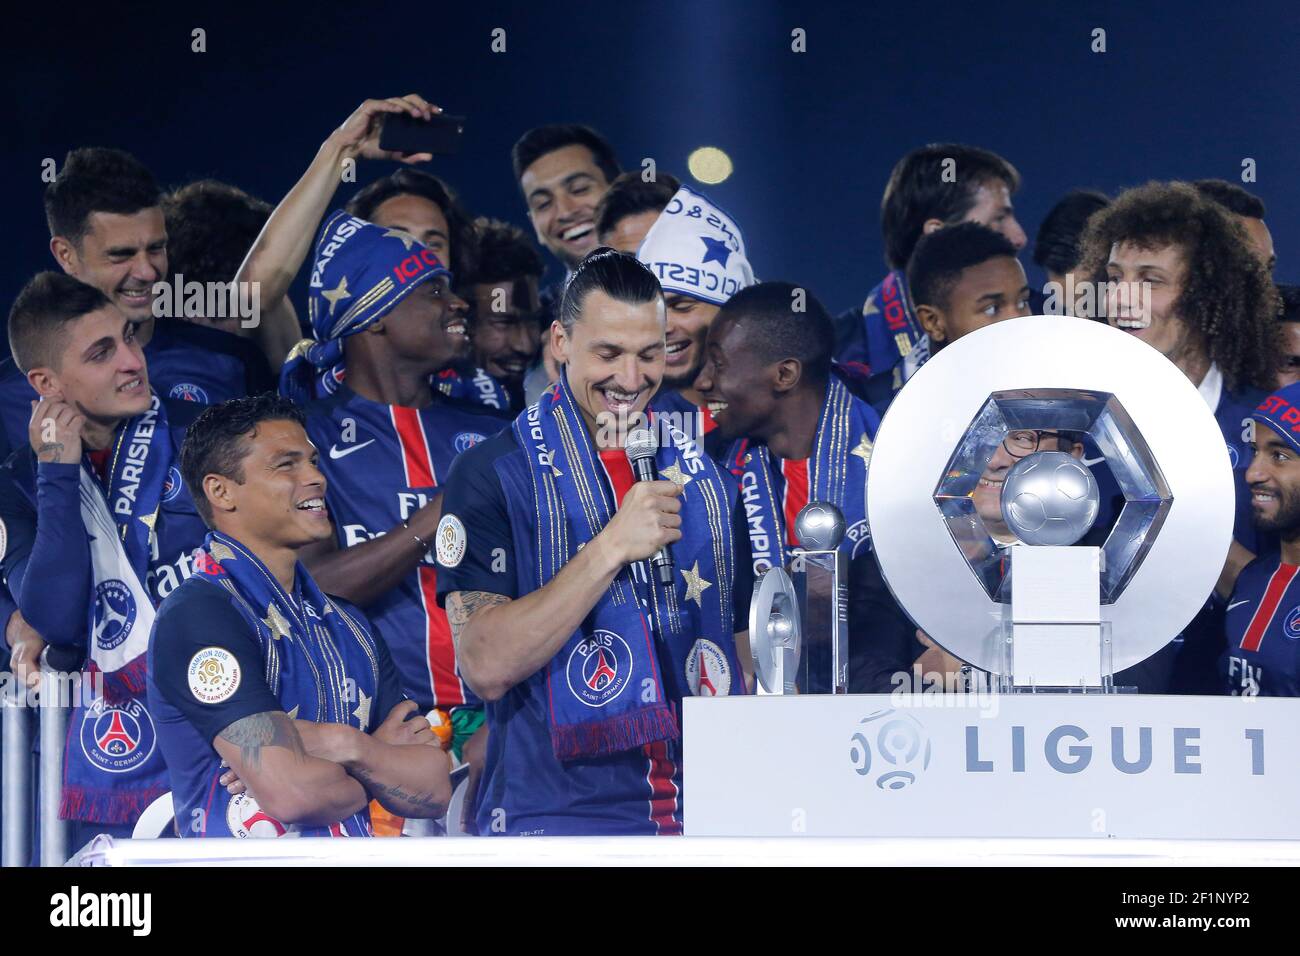 Zlatan Ibrahimovic (psg) had a speech on podium with other players and  Nasser Al-Khelaifi (psg) during the French Championship Ligue 1 football  match between Paris Saint Germain and FC Nantes on May